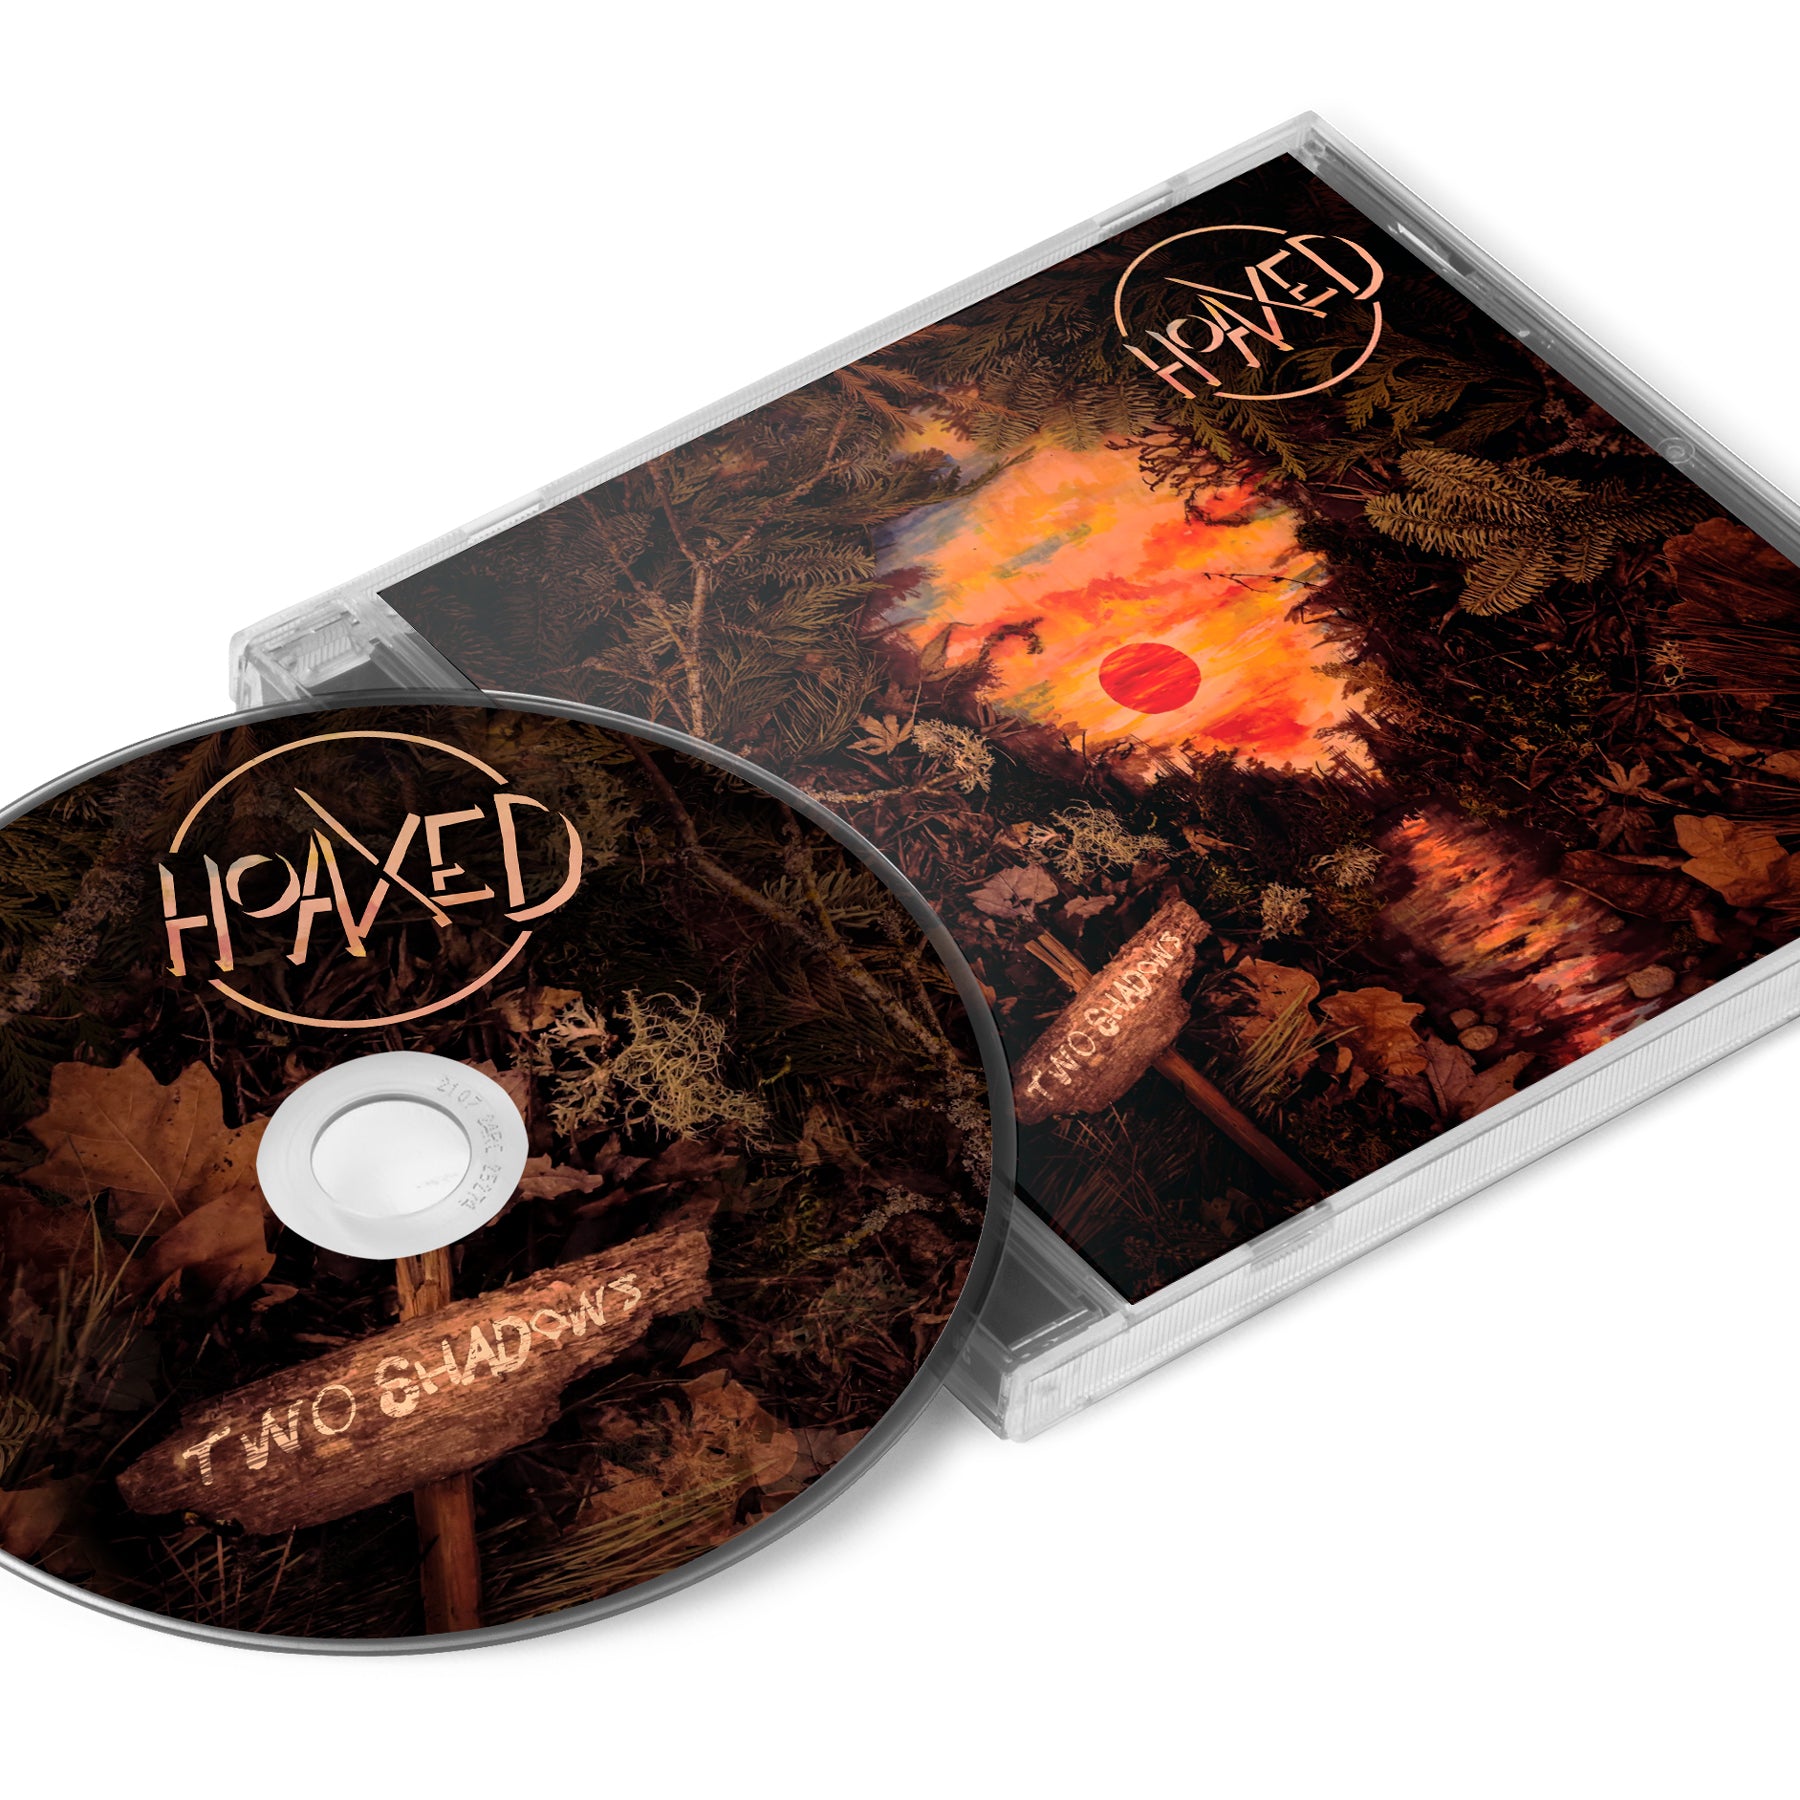 Hoaxed "Two Shadows" CD